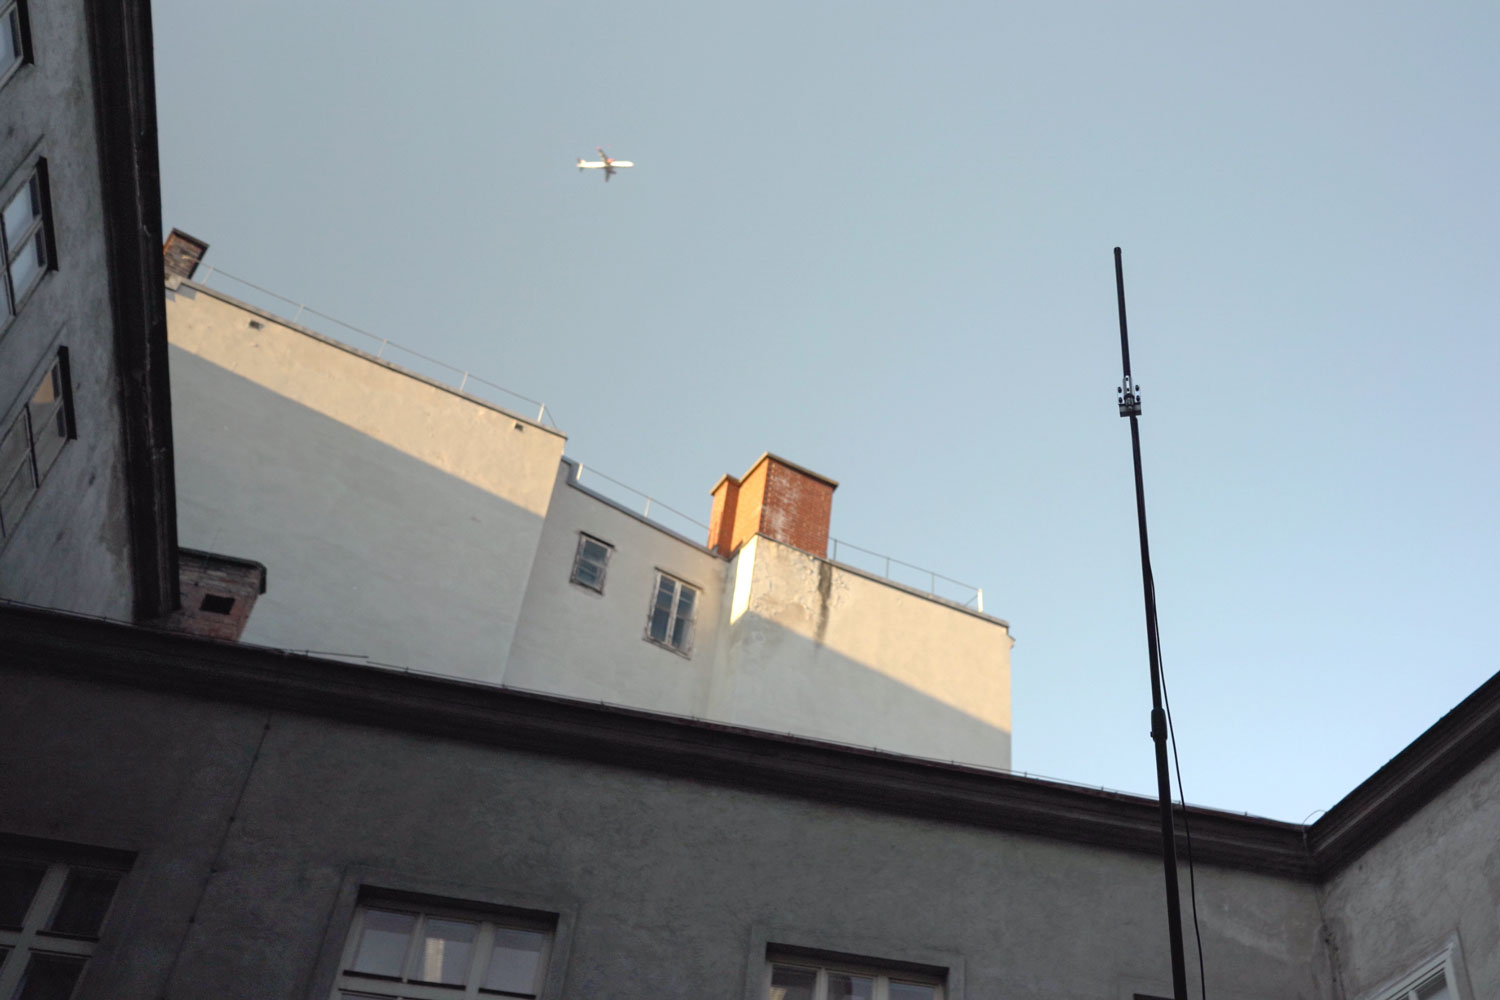 antenna and a plane